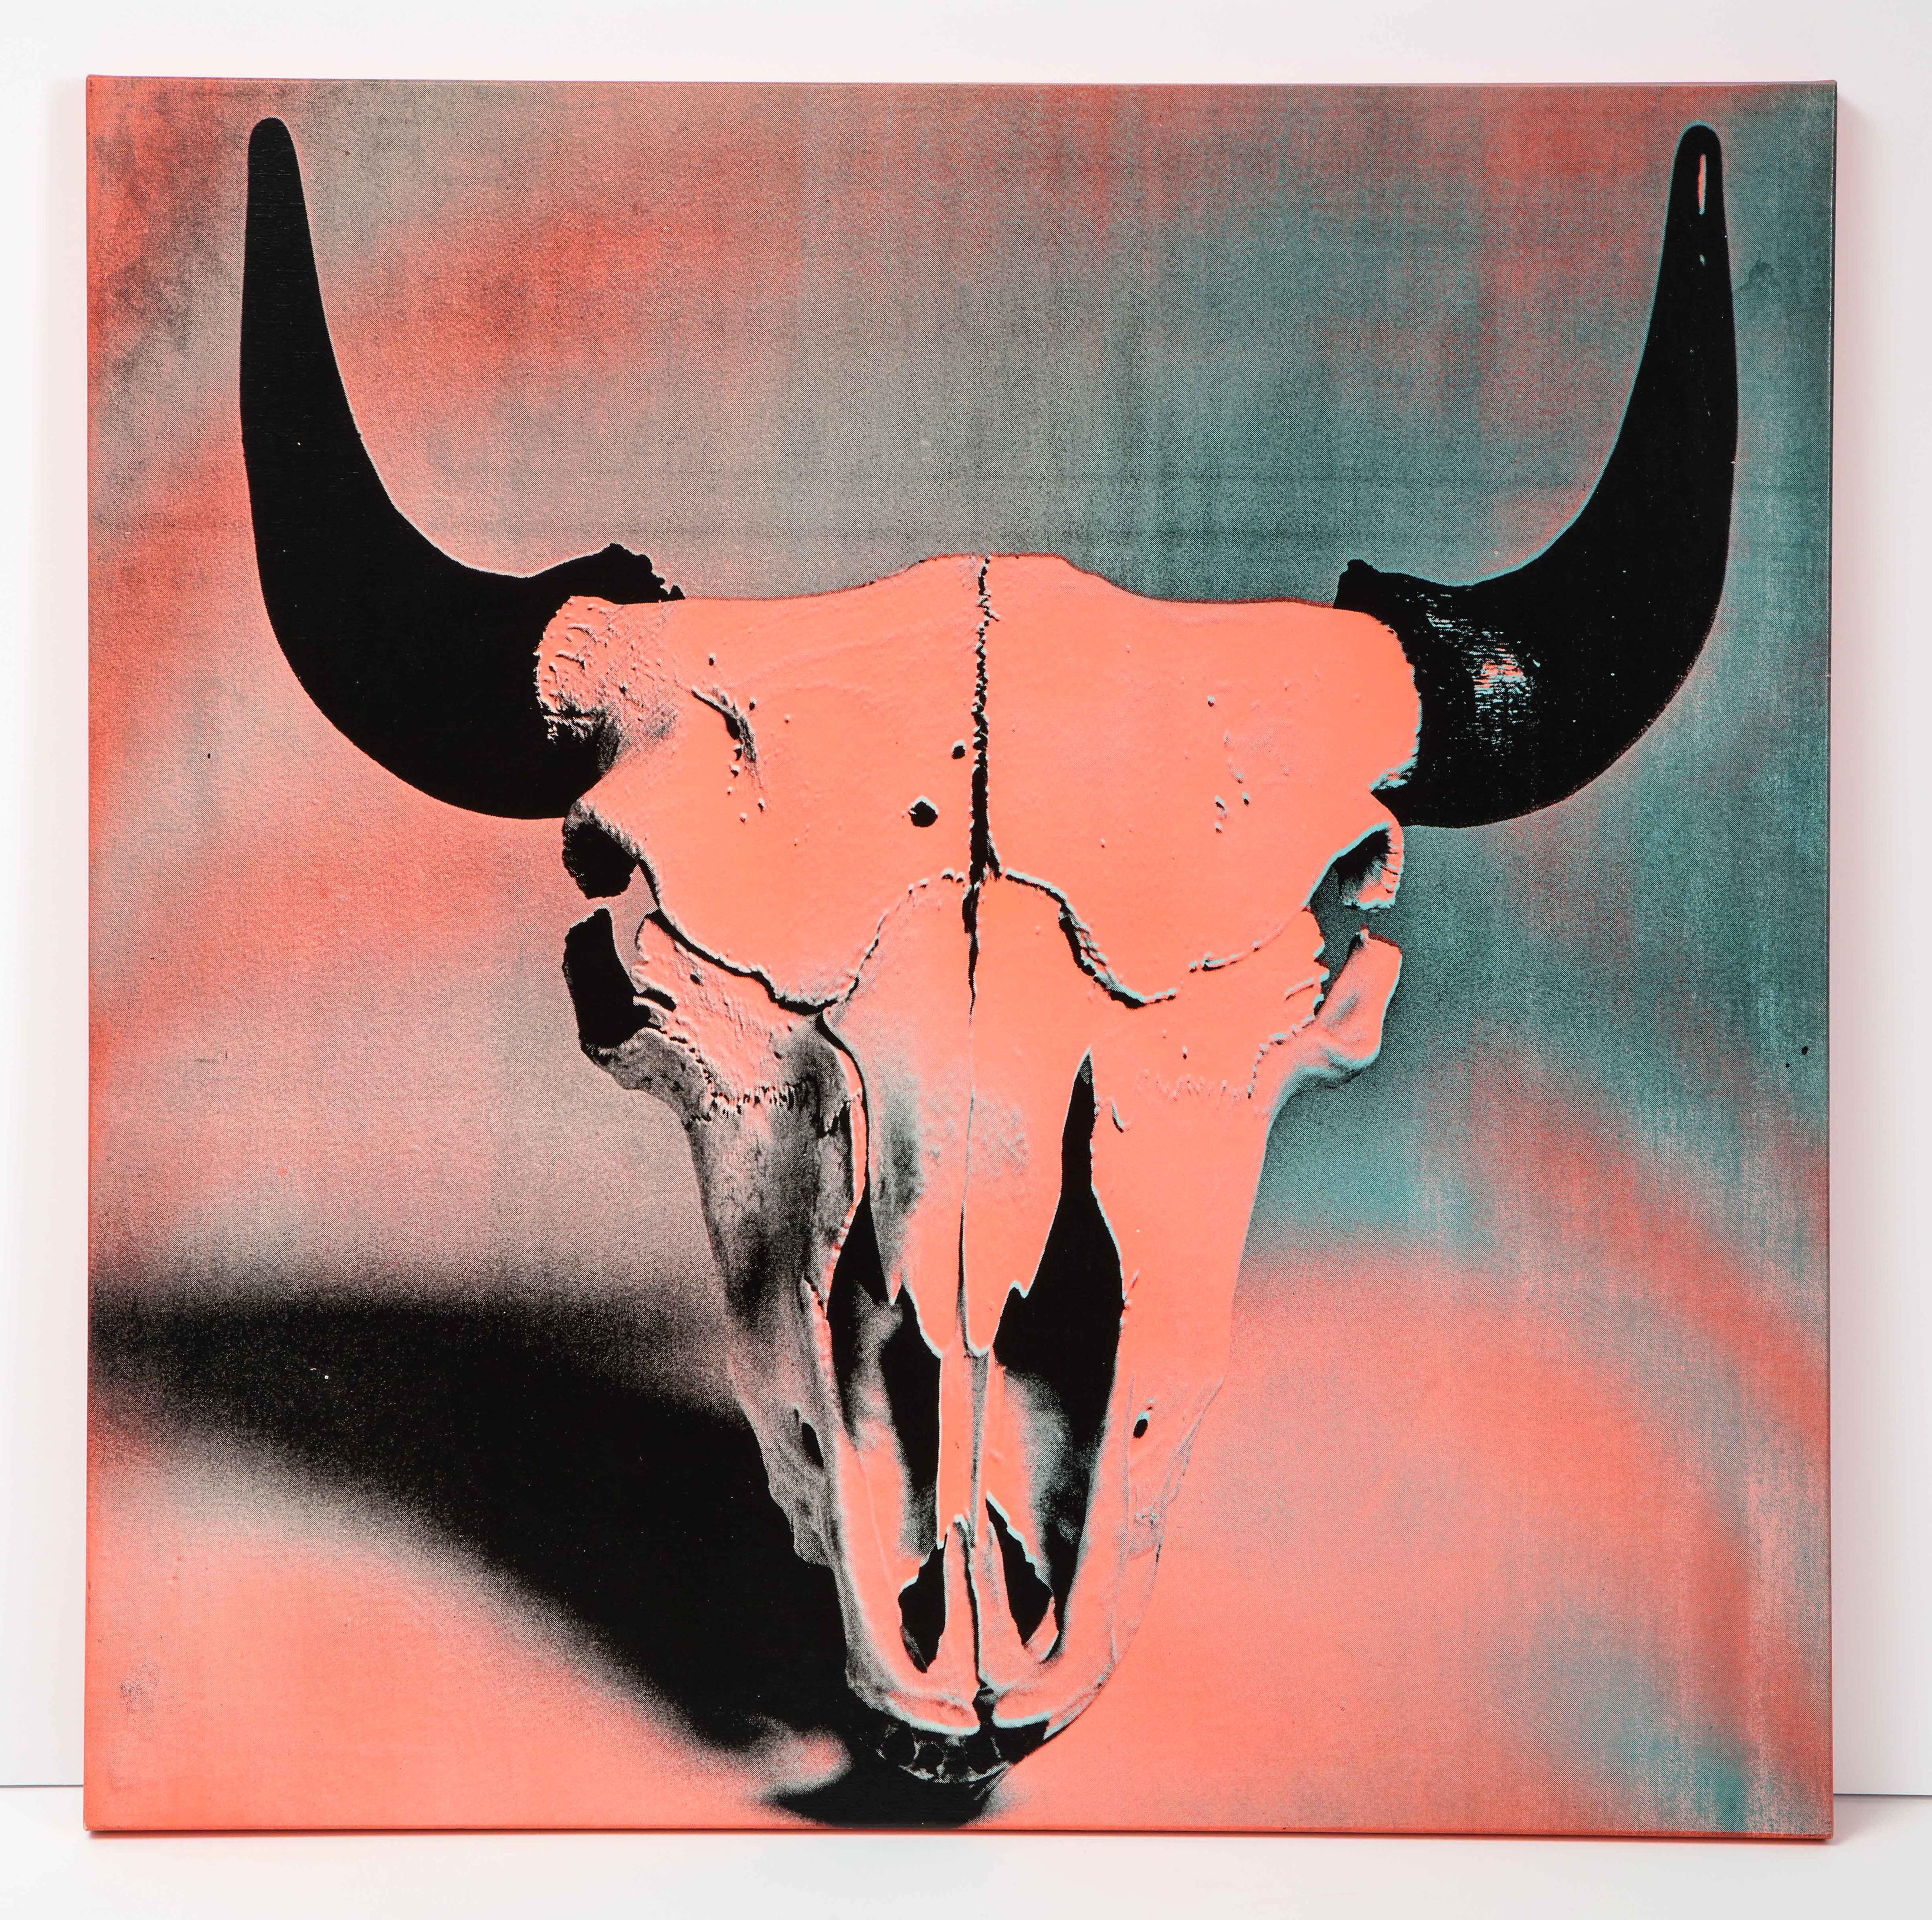 Francesco Scavullo Skull Screenprint on Canvas Signed. Scavullo, a fashion and celebrity photographer by trade, began colorizing his photographs and silk screening them on canvas much like his friend Andy Warhol. The two had collaborated on Warhol's